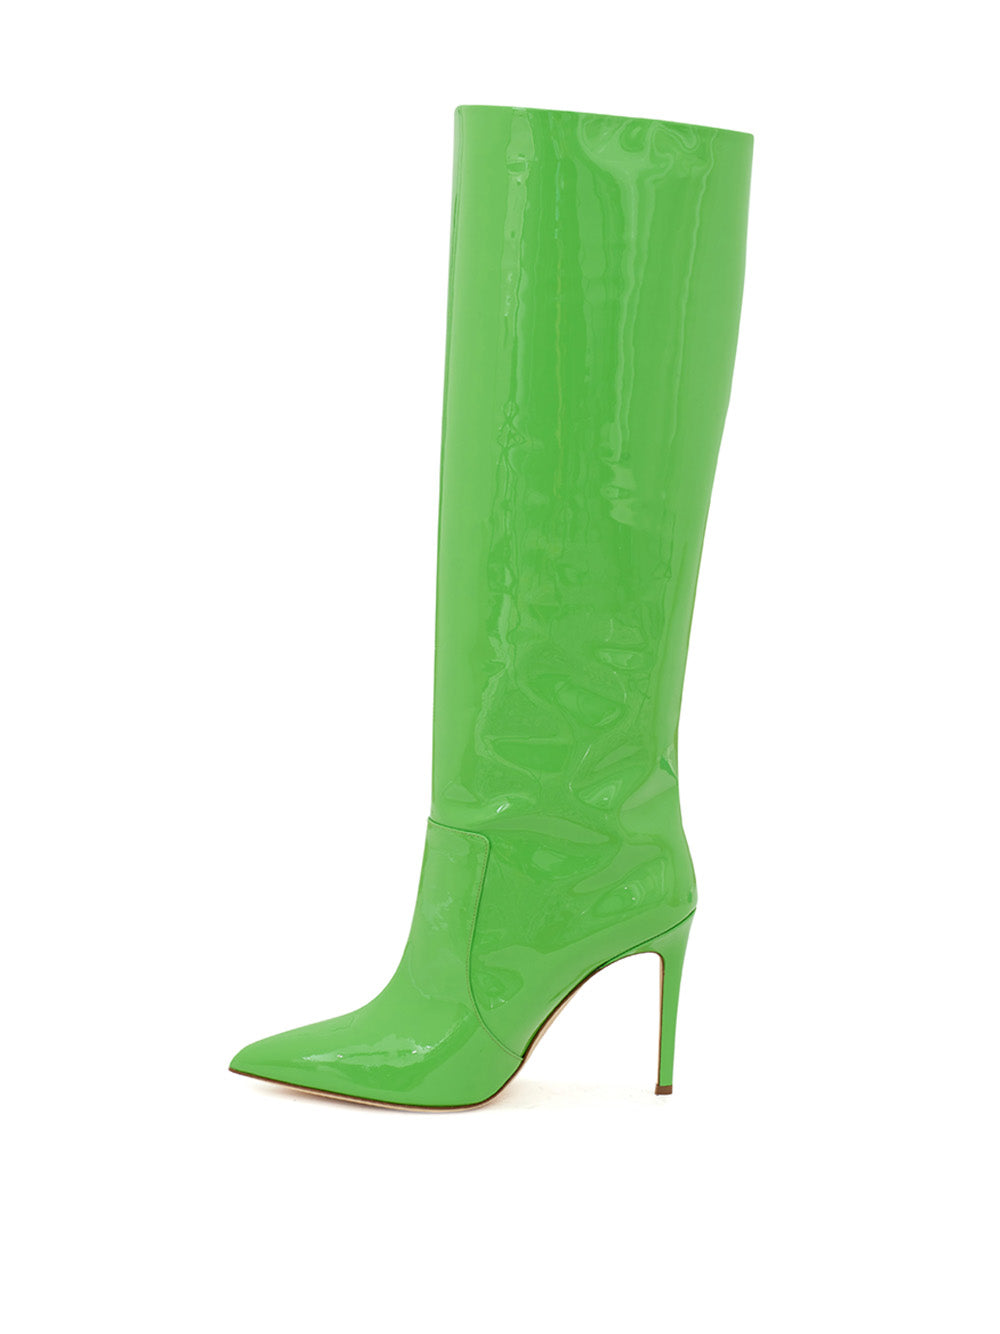 Chic Neon Green Patent Leather Knee Boots